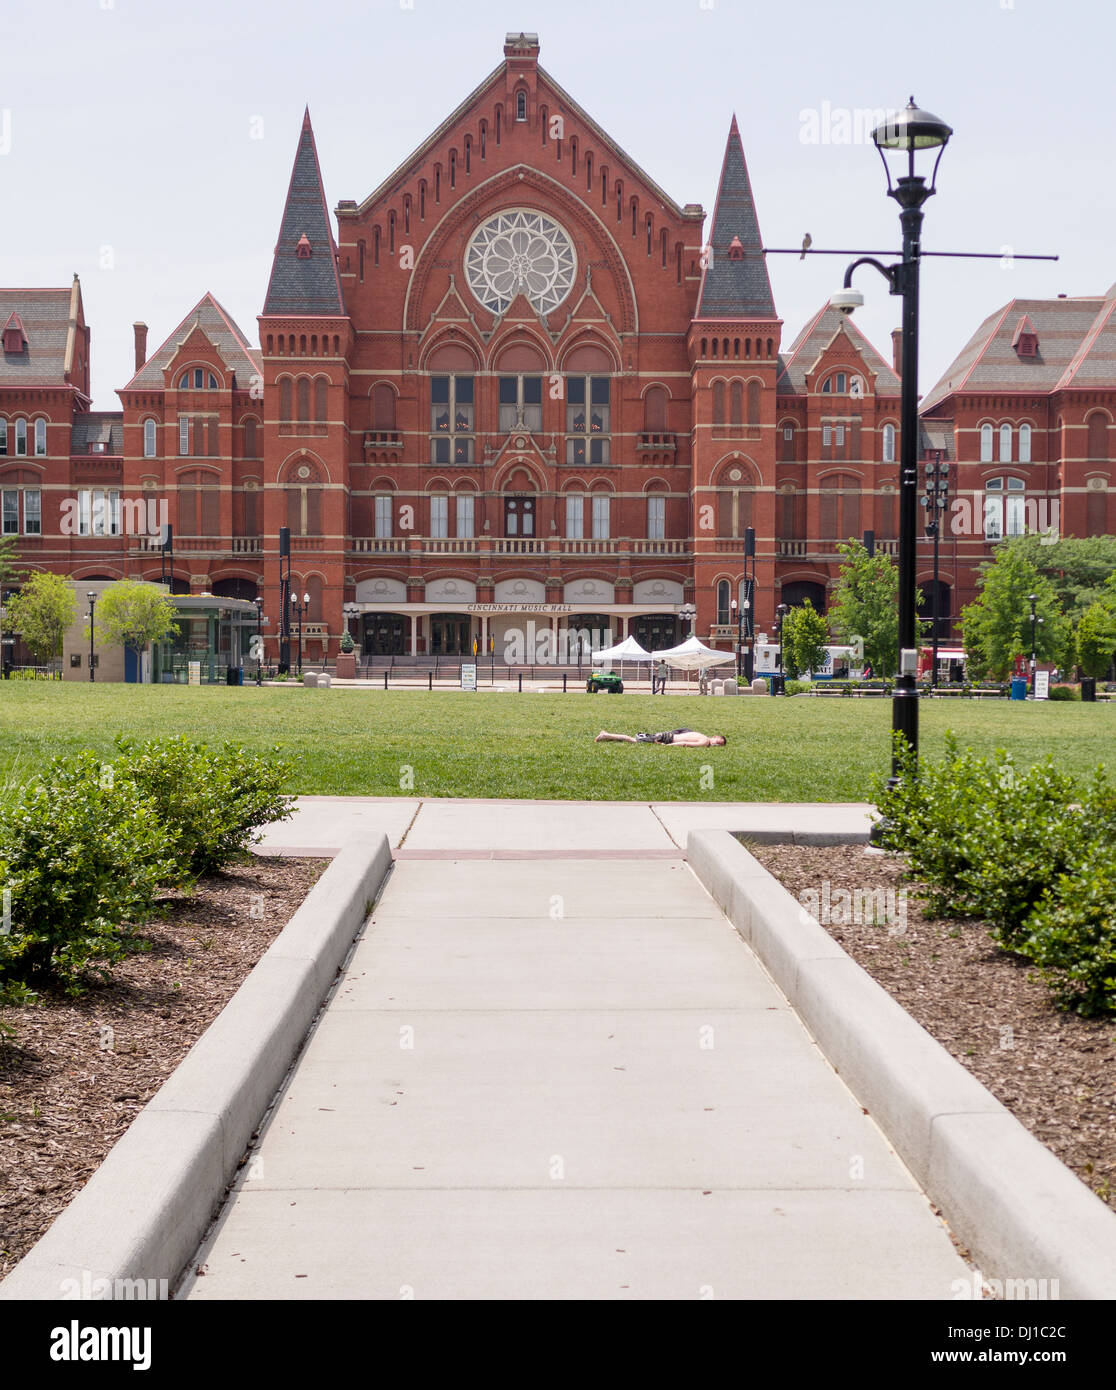 Cincinnati Music Hall with Sunbather. A young man catches a few spring rays on the lawn in front of the red brick music hall. Stock Photo